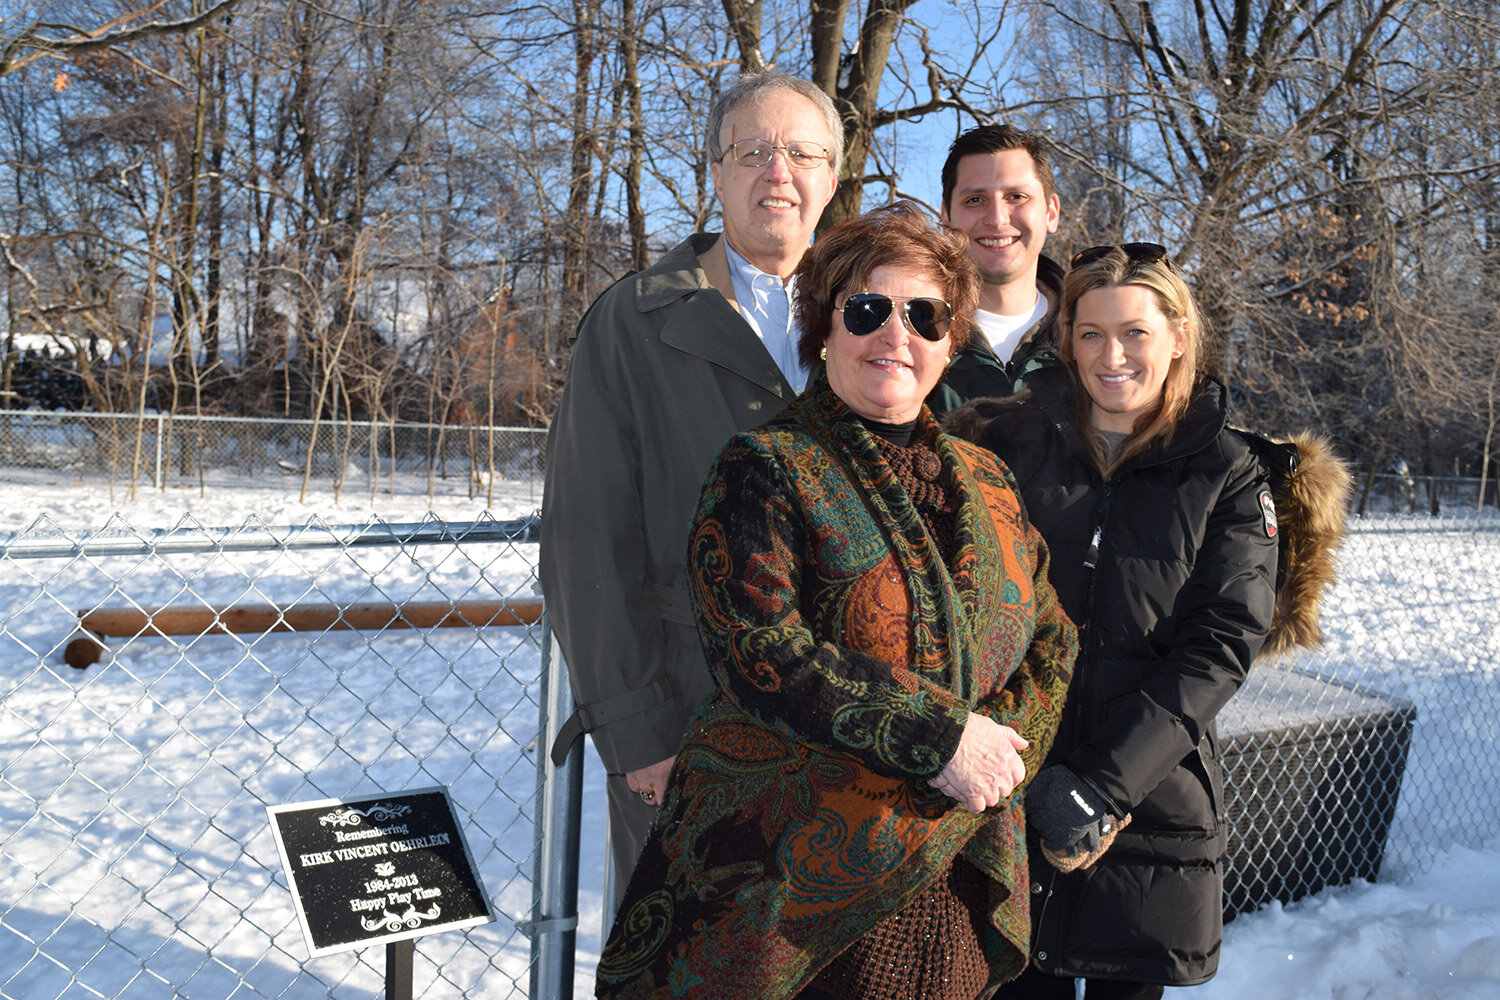  The family of Kirk V. Oehrlein stands near the natural playground at the Walled Lake Children’s Learning Center at the center’s ribbon-cutting in 2015. The playground is dedicated to Oehrlein’s memory. 